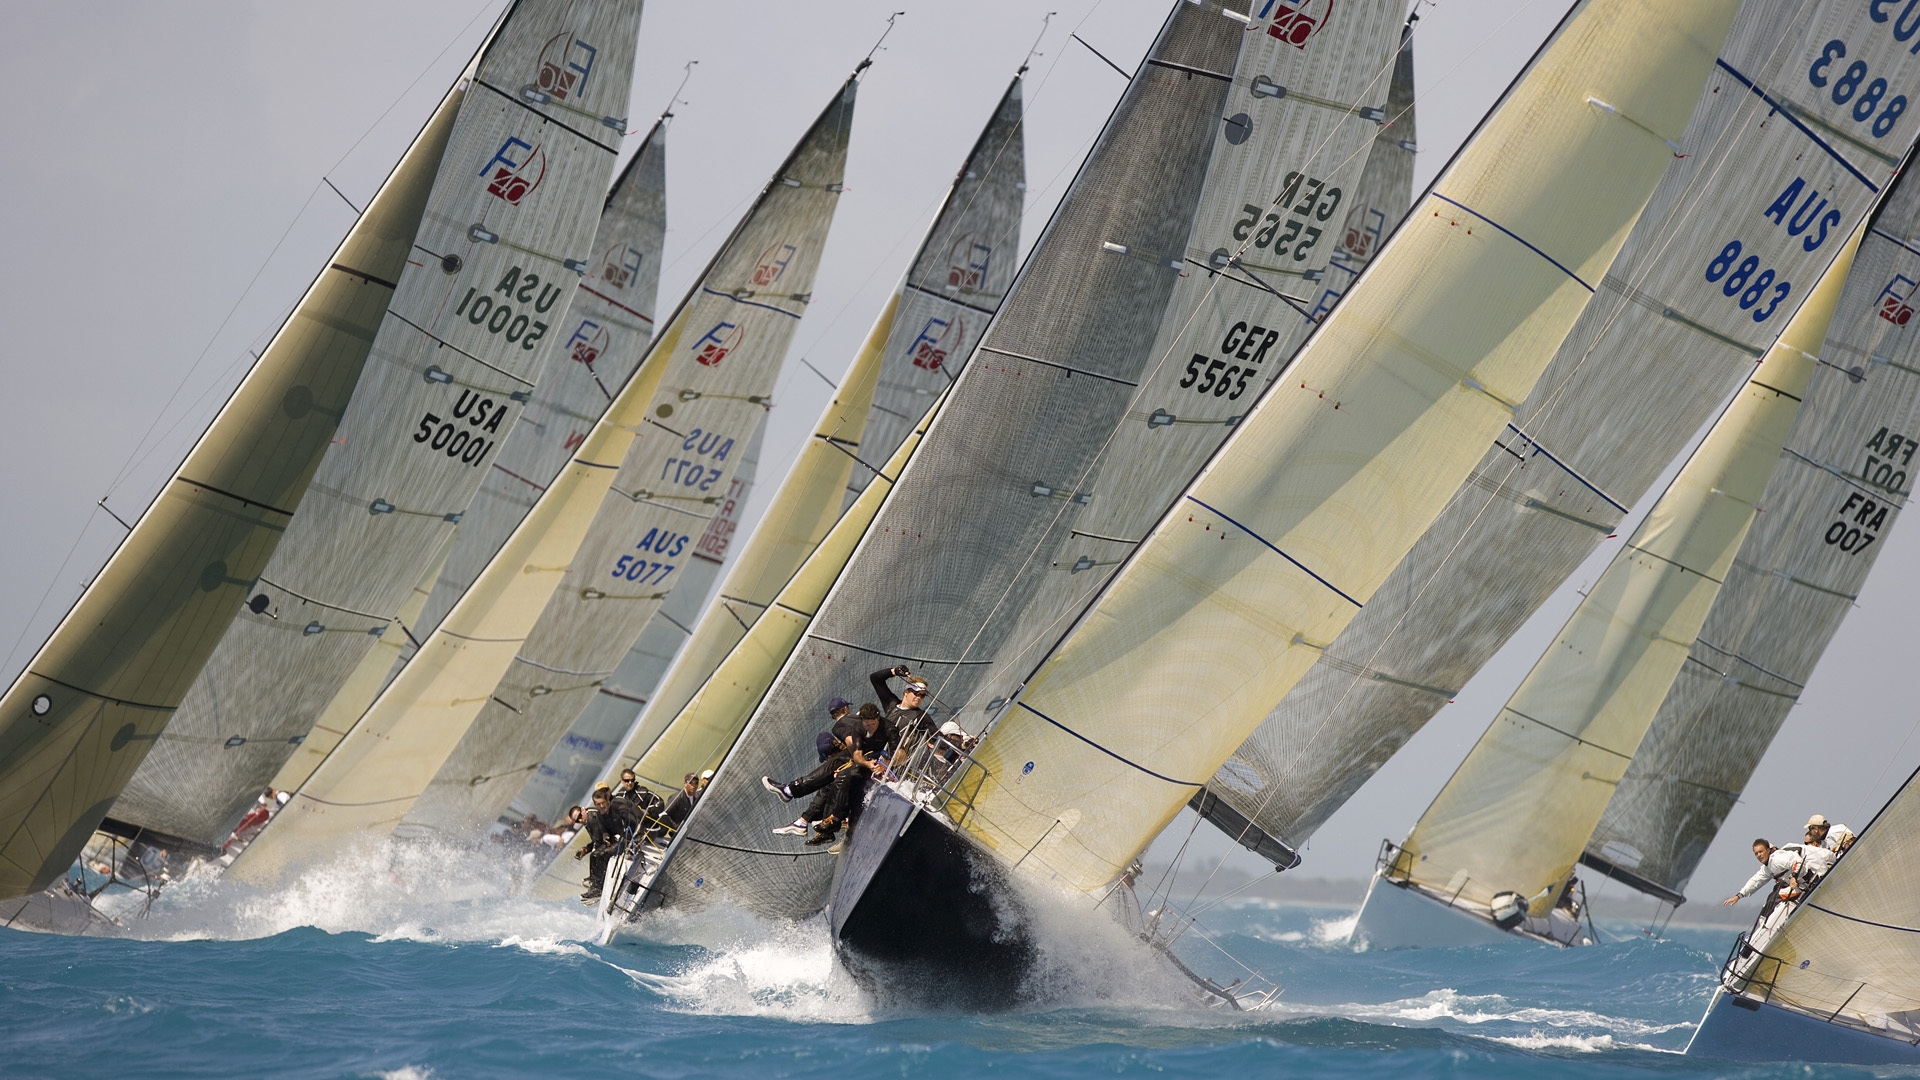 yacht racing images of the year